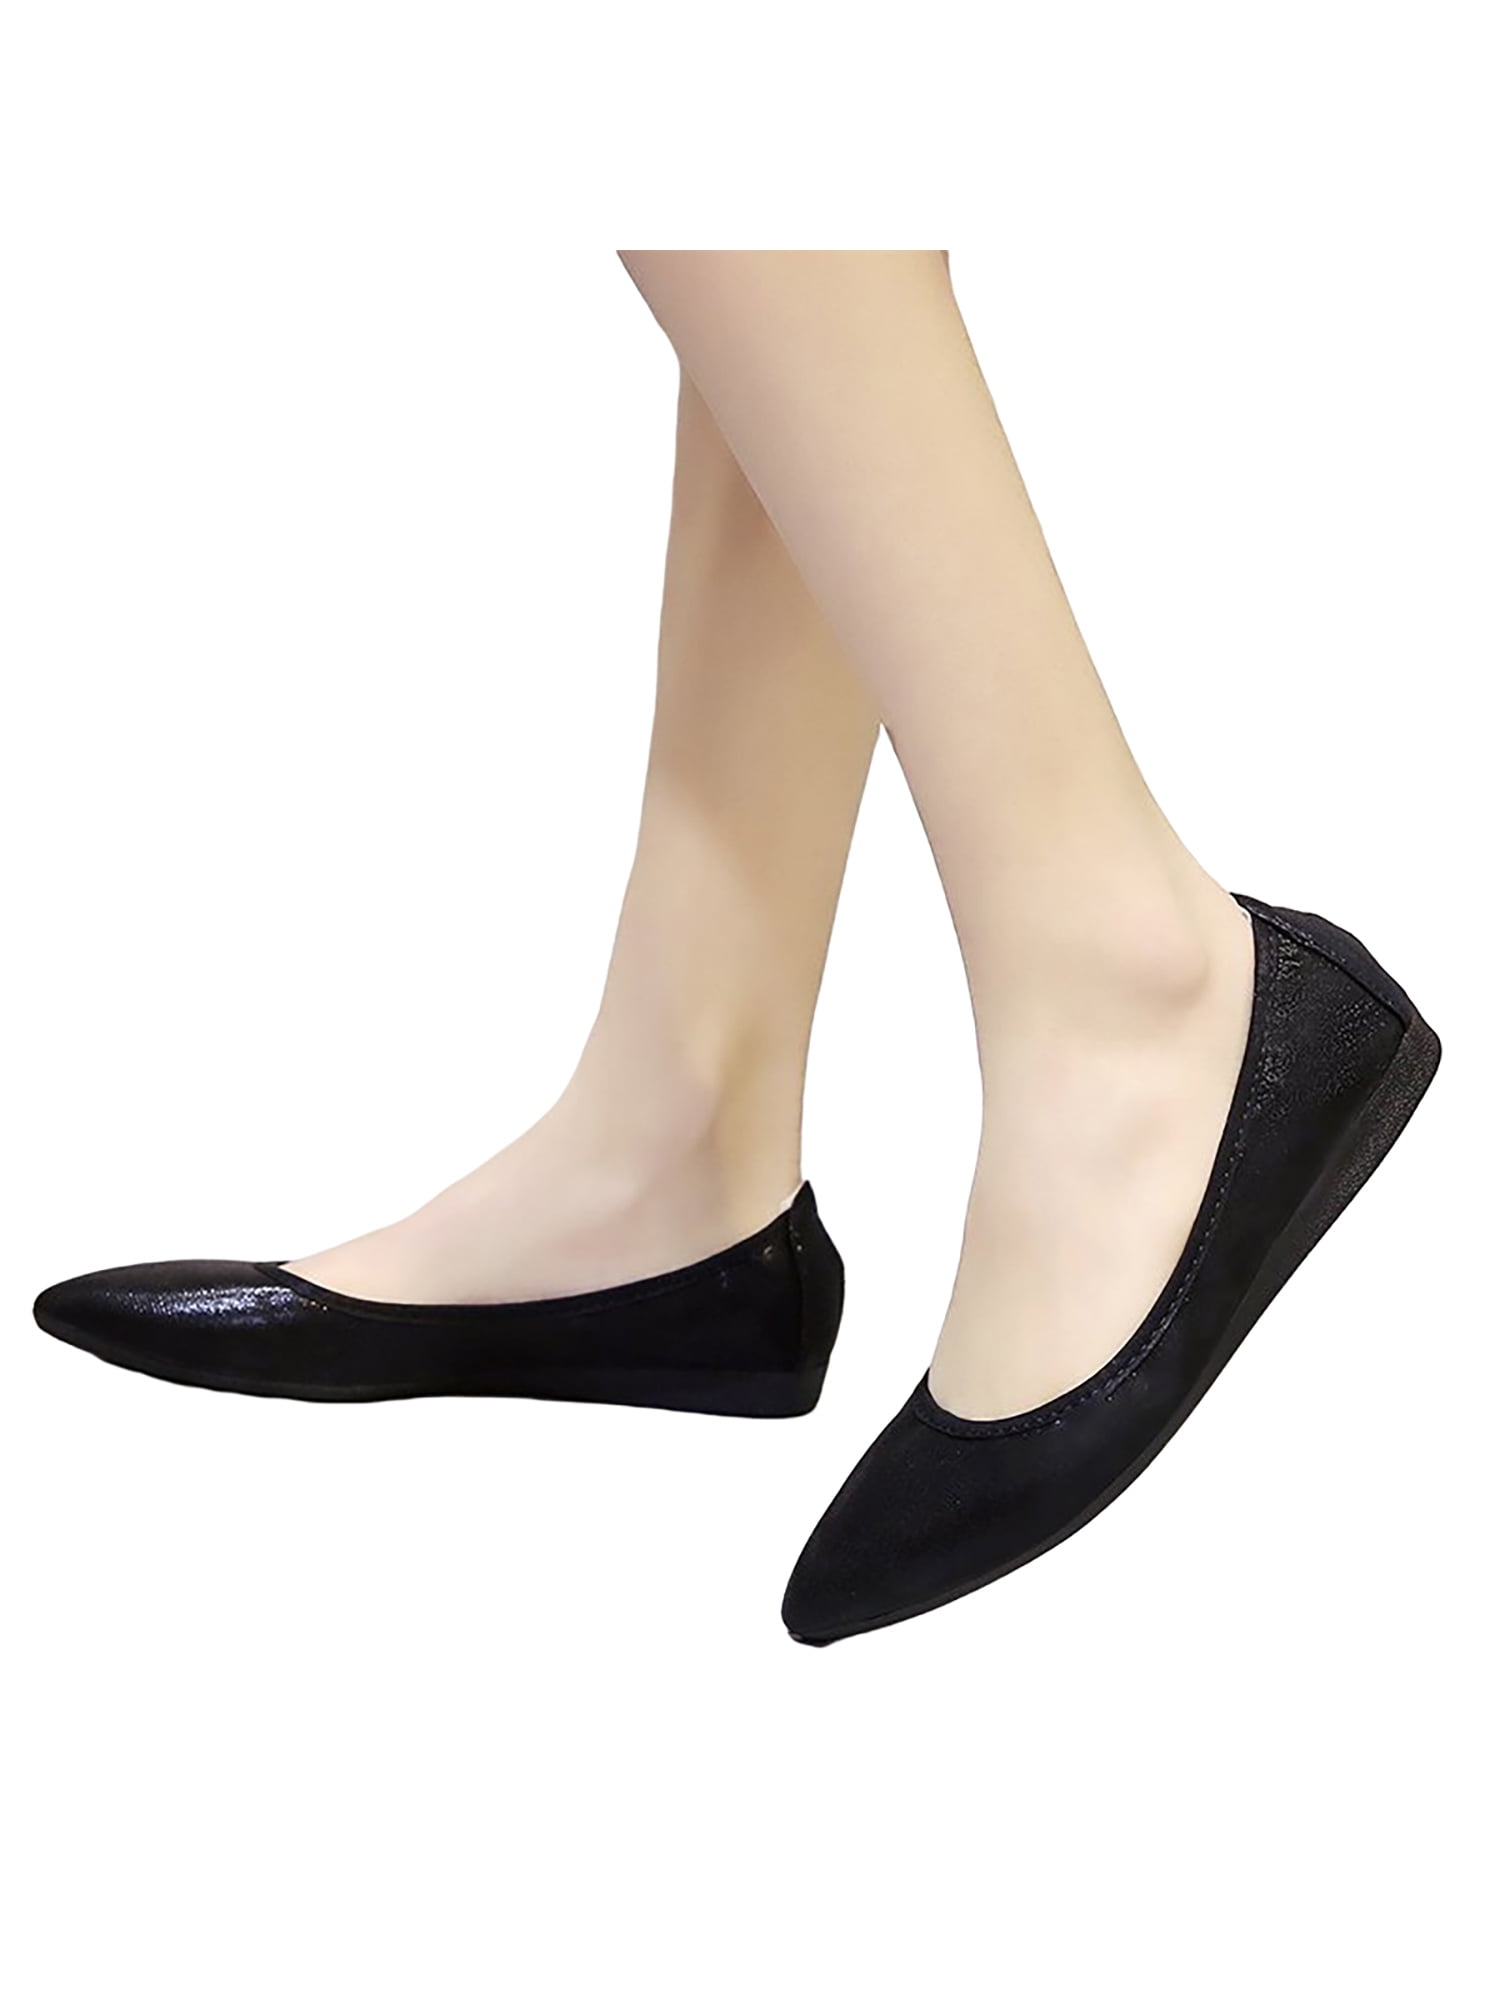 Women's Ballerina Ballet Flats Shoes Slip On Boat Loafers Pump Dolly Shoes Plain 